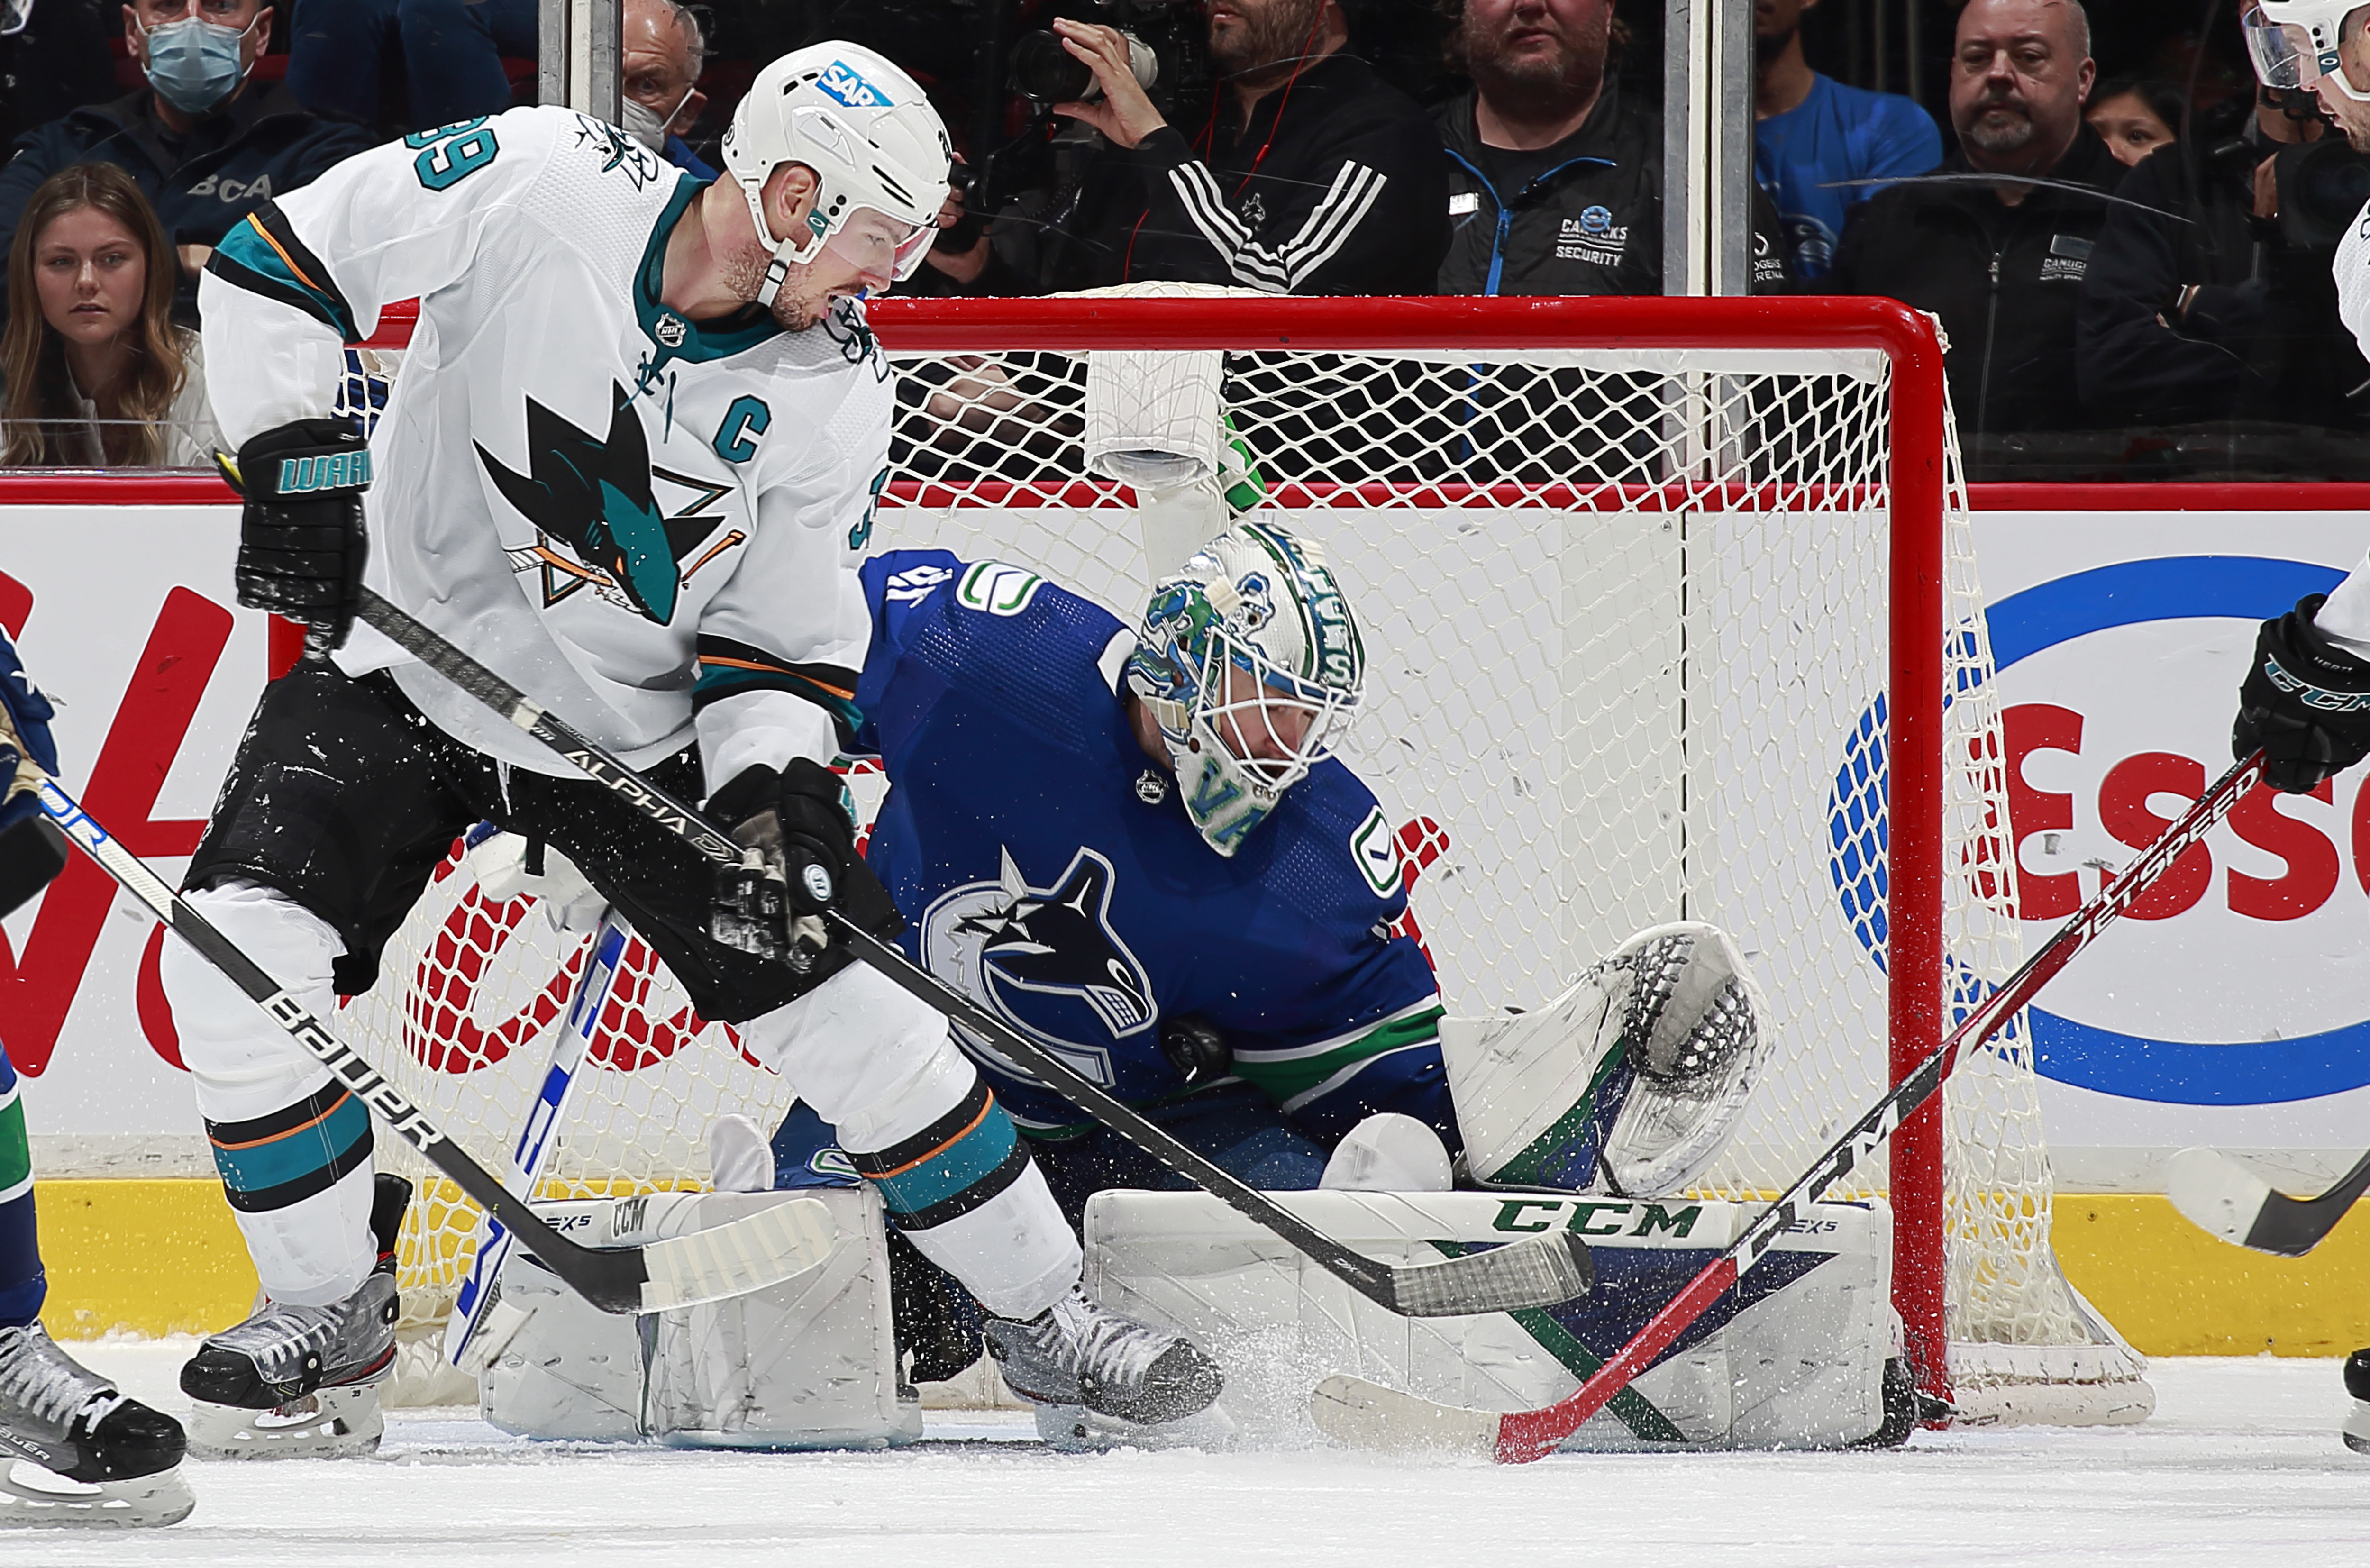 Thatcher Demko #35 of the Vancouver Canucks makes a save against Logan Couture #39 of the San Jose Sharks during their NHL game at Rogers Arena April 9, 2022 in Vancouver, British Columbia, Canada.